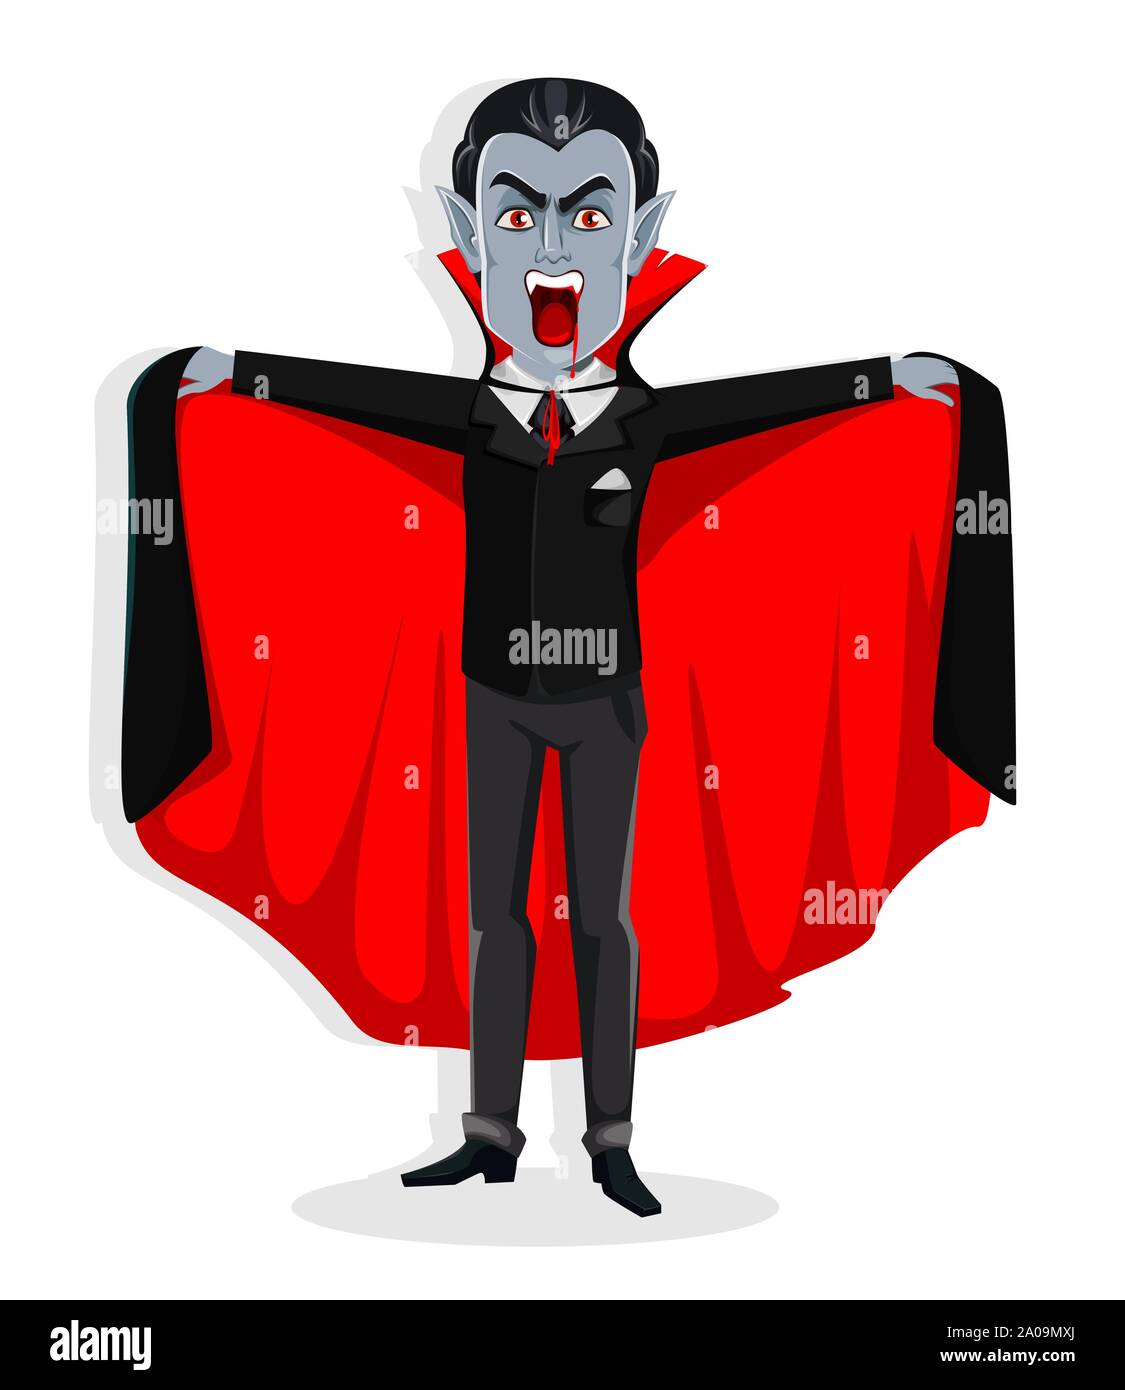 99+ Thousand Cartoon Vampire Royalty-Free Images, Stock Photos & Pictures